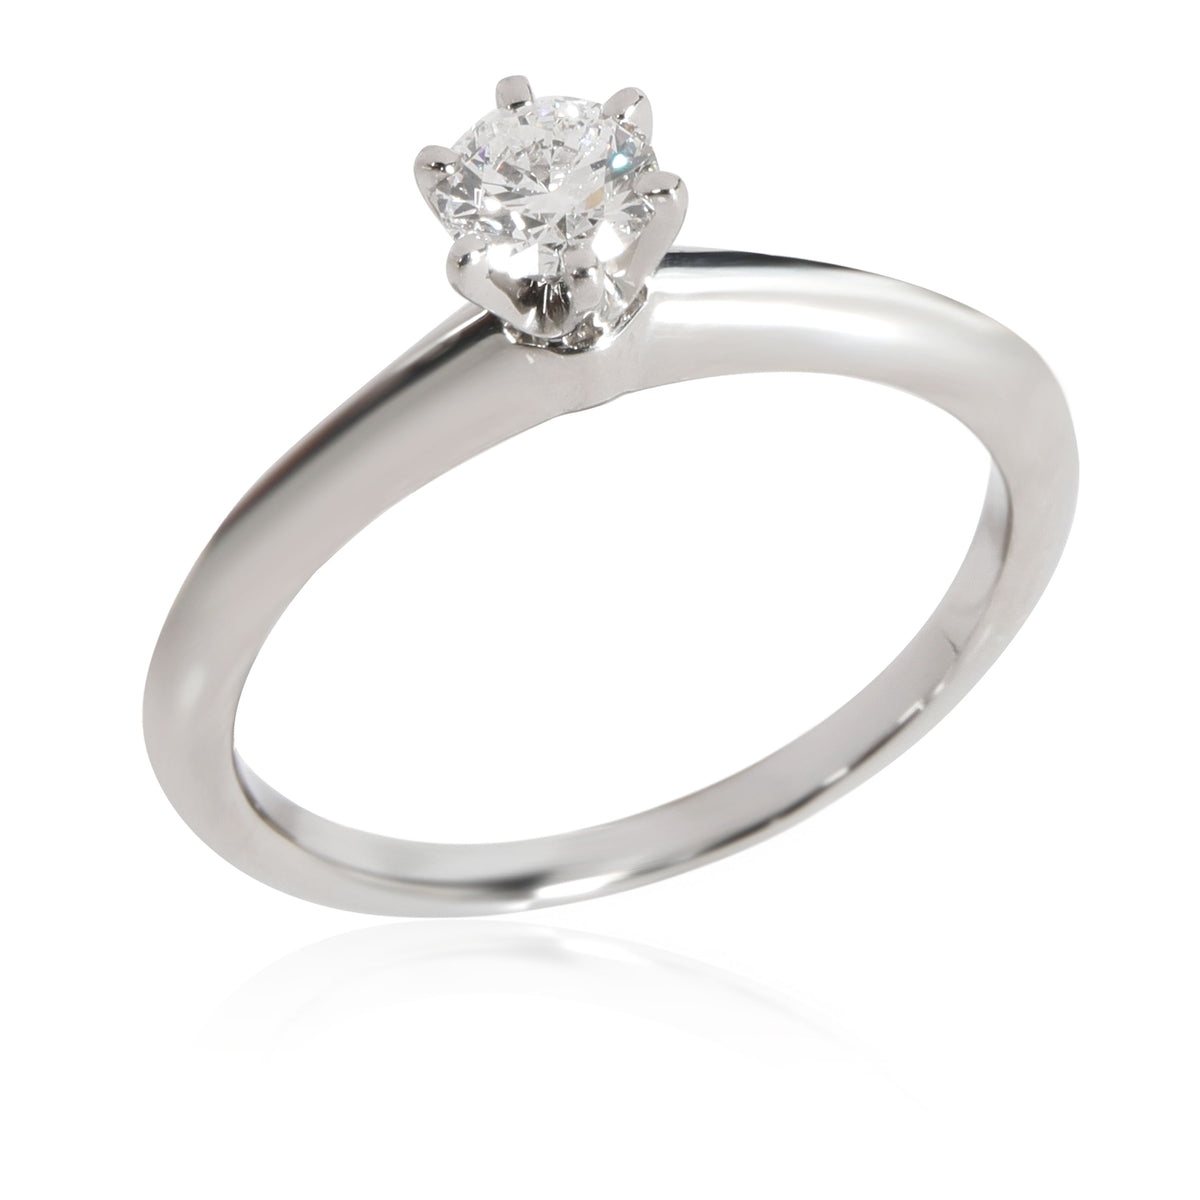 Tiffany & Co. Solitaire Diamond Engagement Ring in Platinum G VS1 0.25 CT